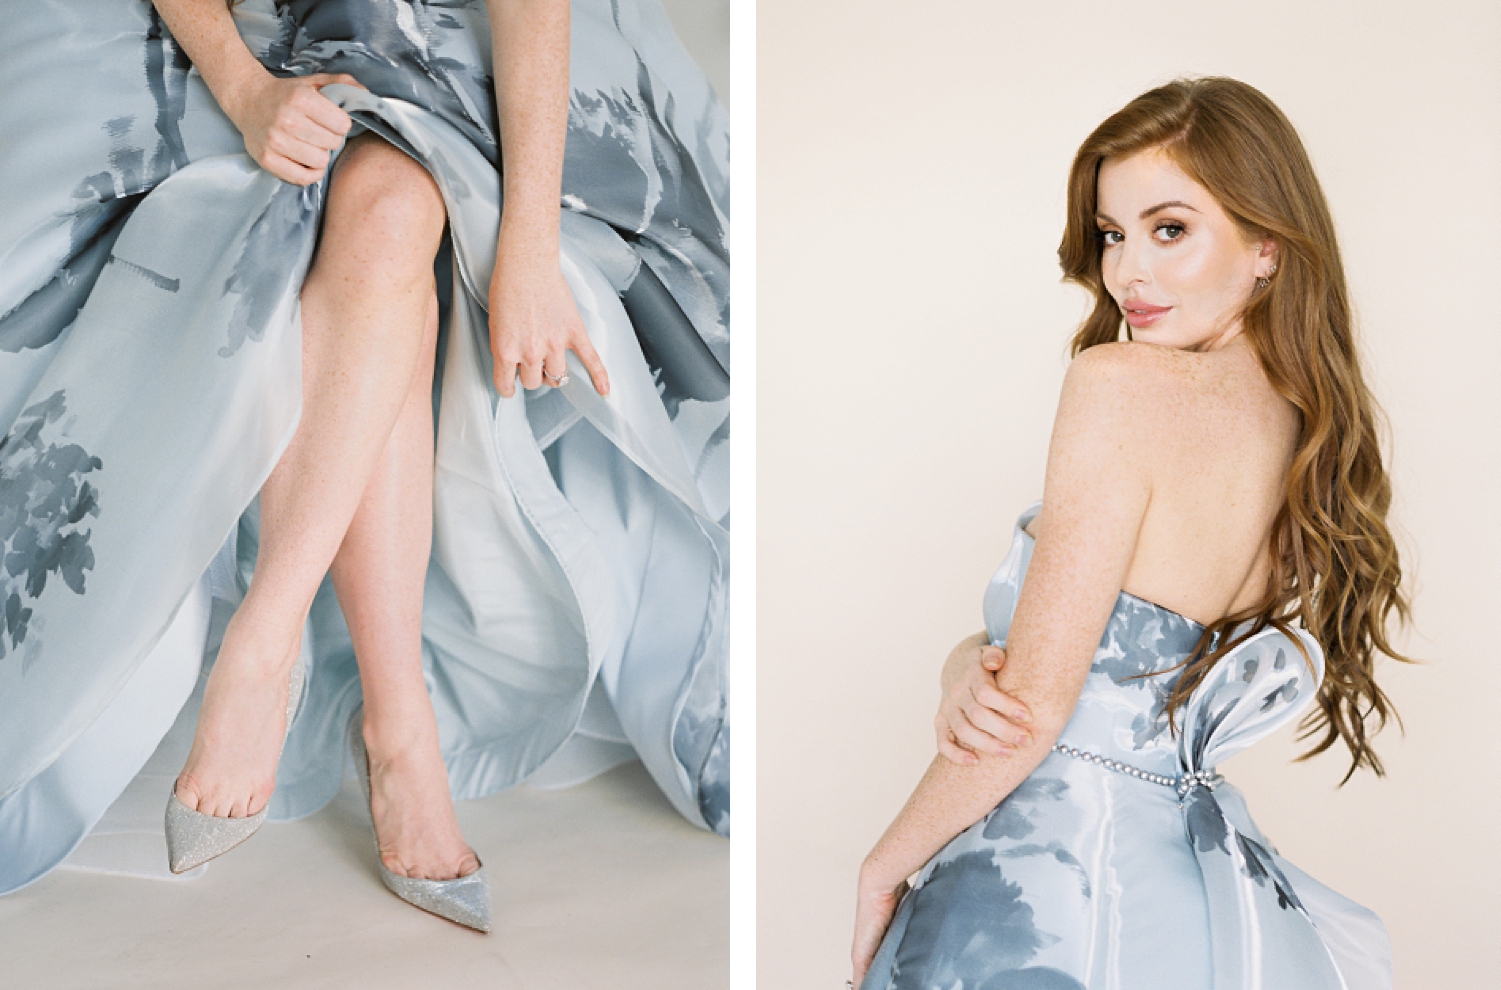 Blue floral ball gown worn by redhead woman legs crossed silver shoes